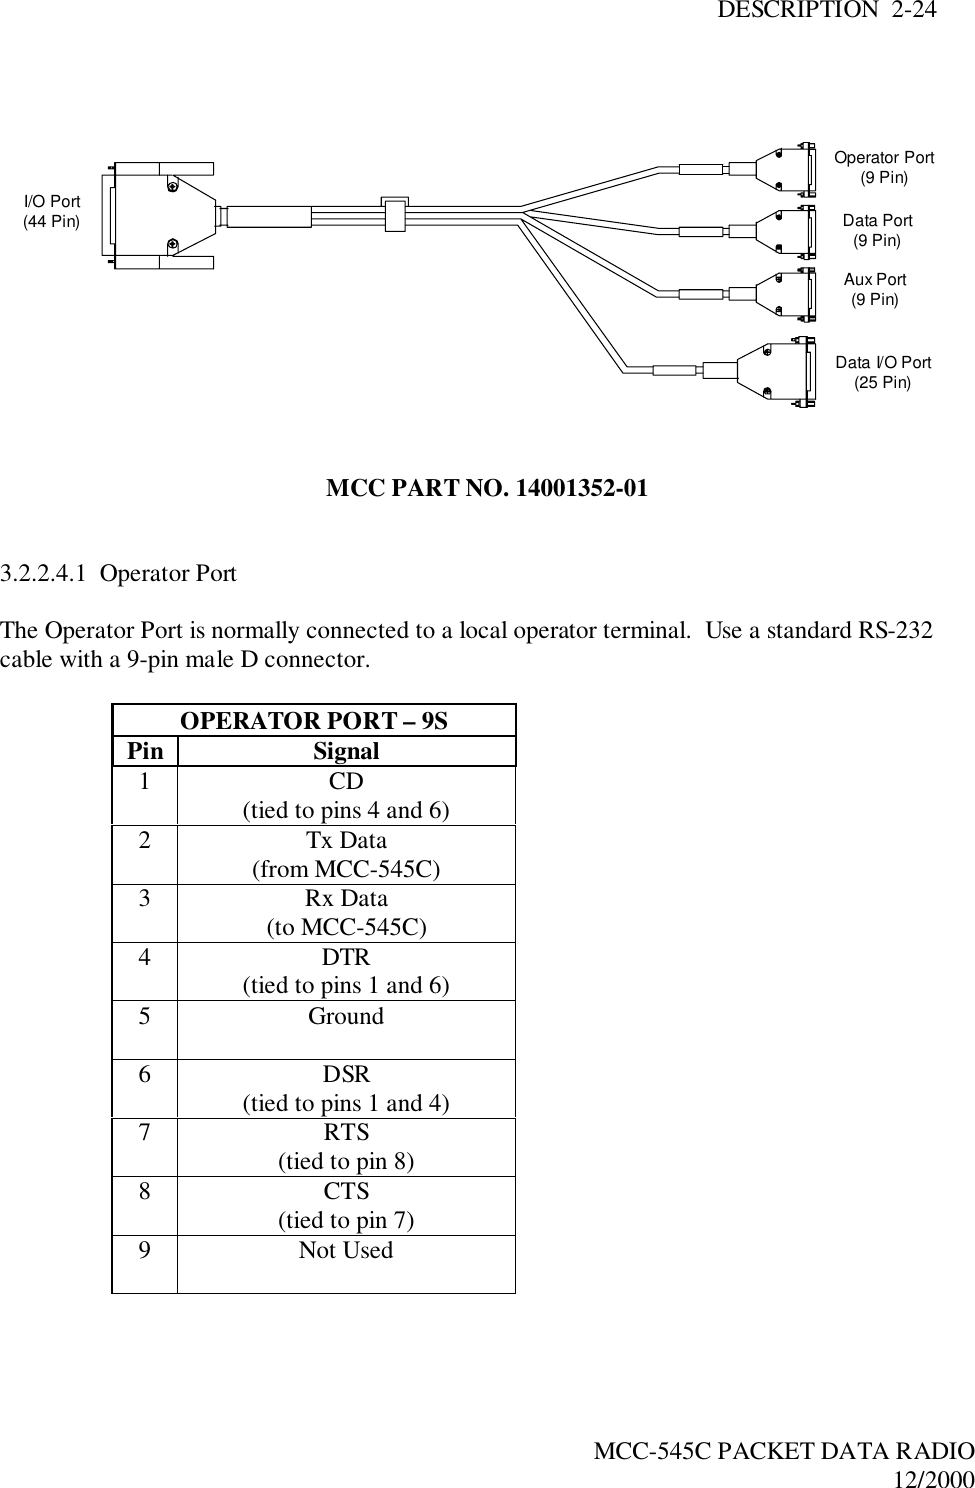 DESCRIPTION  2-24MCC-545C PACKET DATA RADIO12/2000MCC PART NO. 14001352-013.2.2.4.1  Operator PortThe Operator Port is normally connected to a local operator terminal.  Use a standard RS-232cable with a 9-pin male D connector.OPERATOR PORT – 9SPin Signal1CD(tied to pins 4 and 6)2Tx Data(from MCC-545C)3Rx Data(to MCC-545C)4DTR(tied to pins 1 and 6)5 Ground6DSR(tied to pins 1 and 4)7RTS(tied to pin 8)8CTS(tied to pin 7)9 Not UsedI/O Port(44 Pin)Data I/O Port(25 Pin)Aux Port(9 Pin)Data Port(9 Pin)Operator Port(9 Pin)